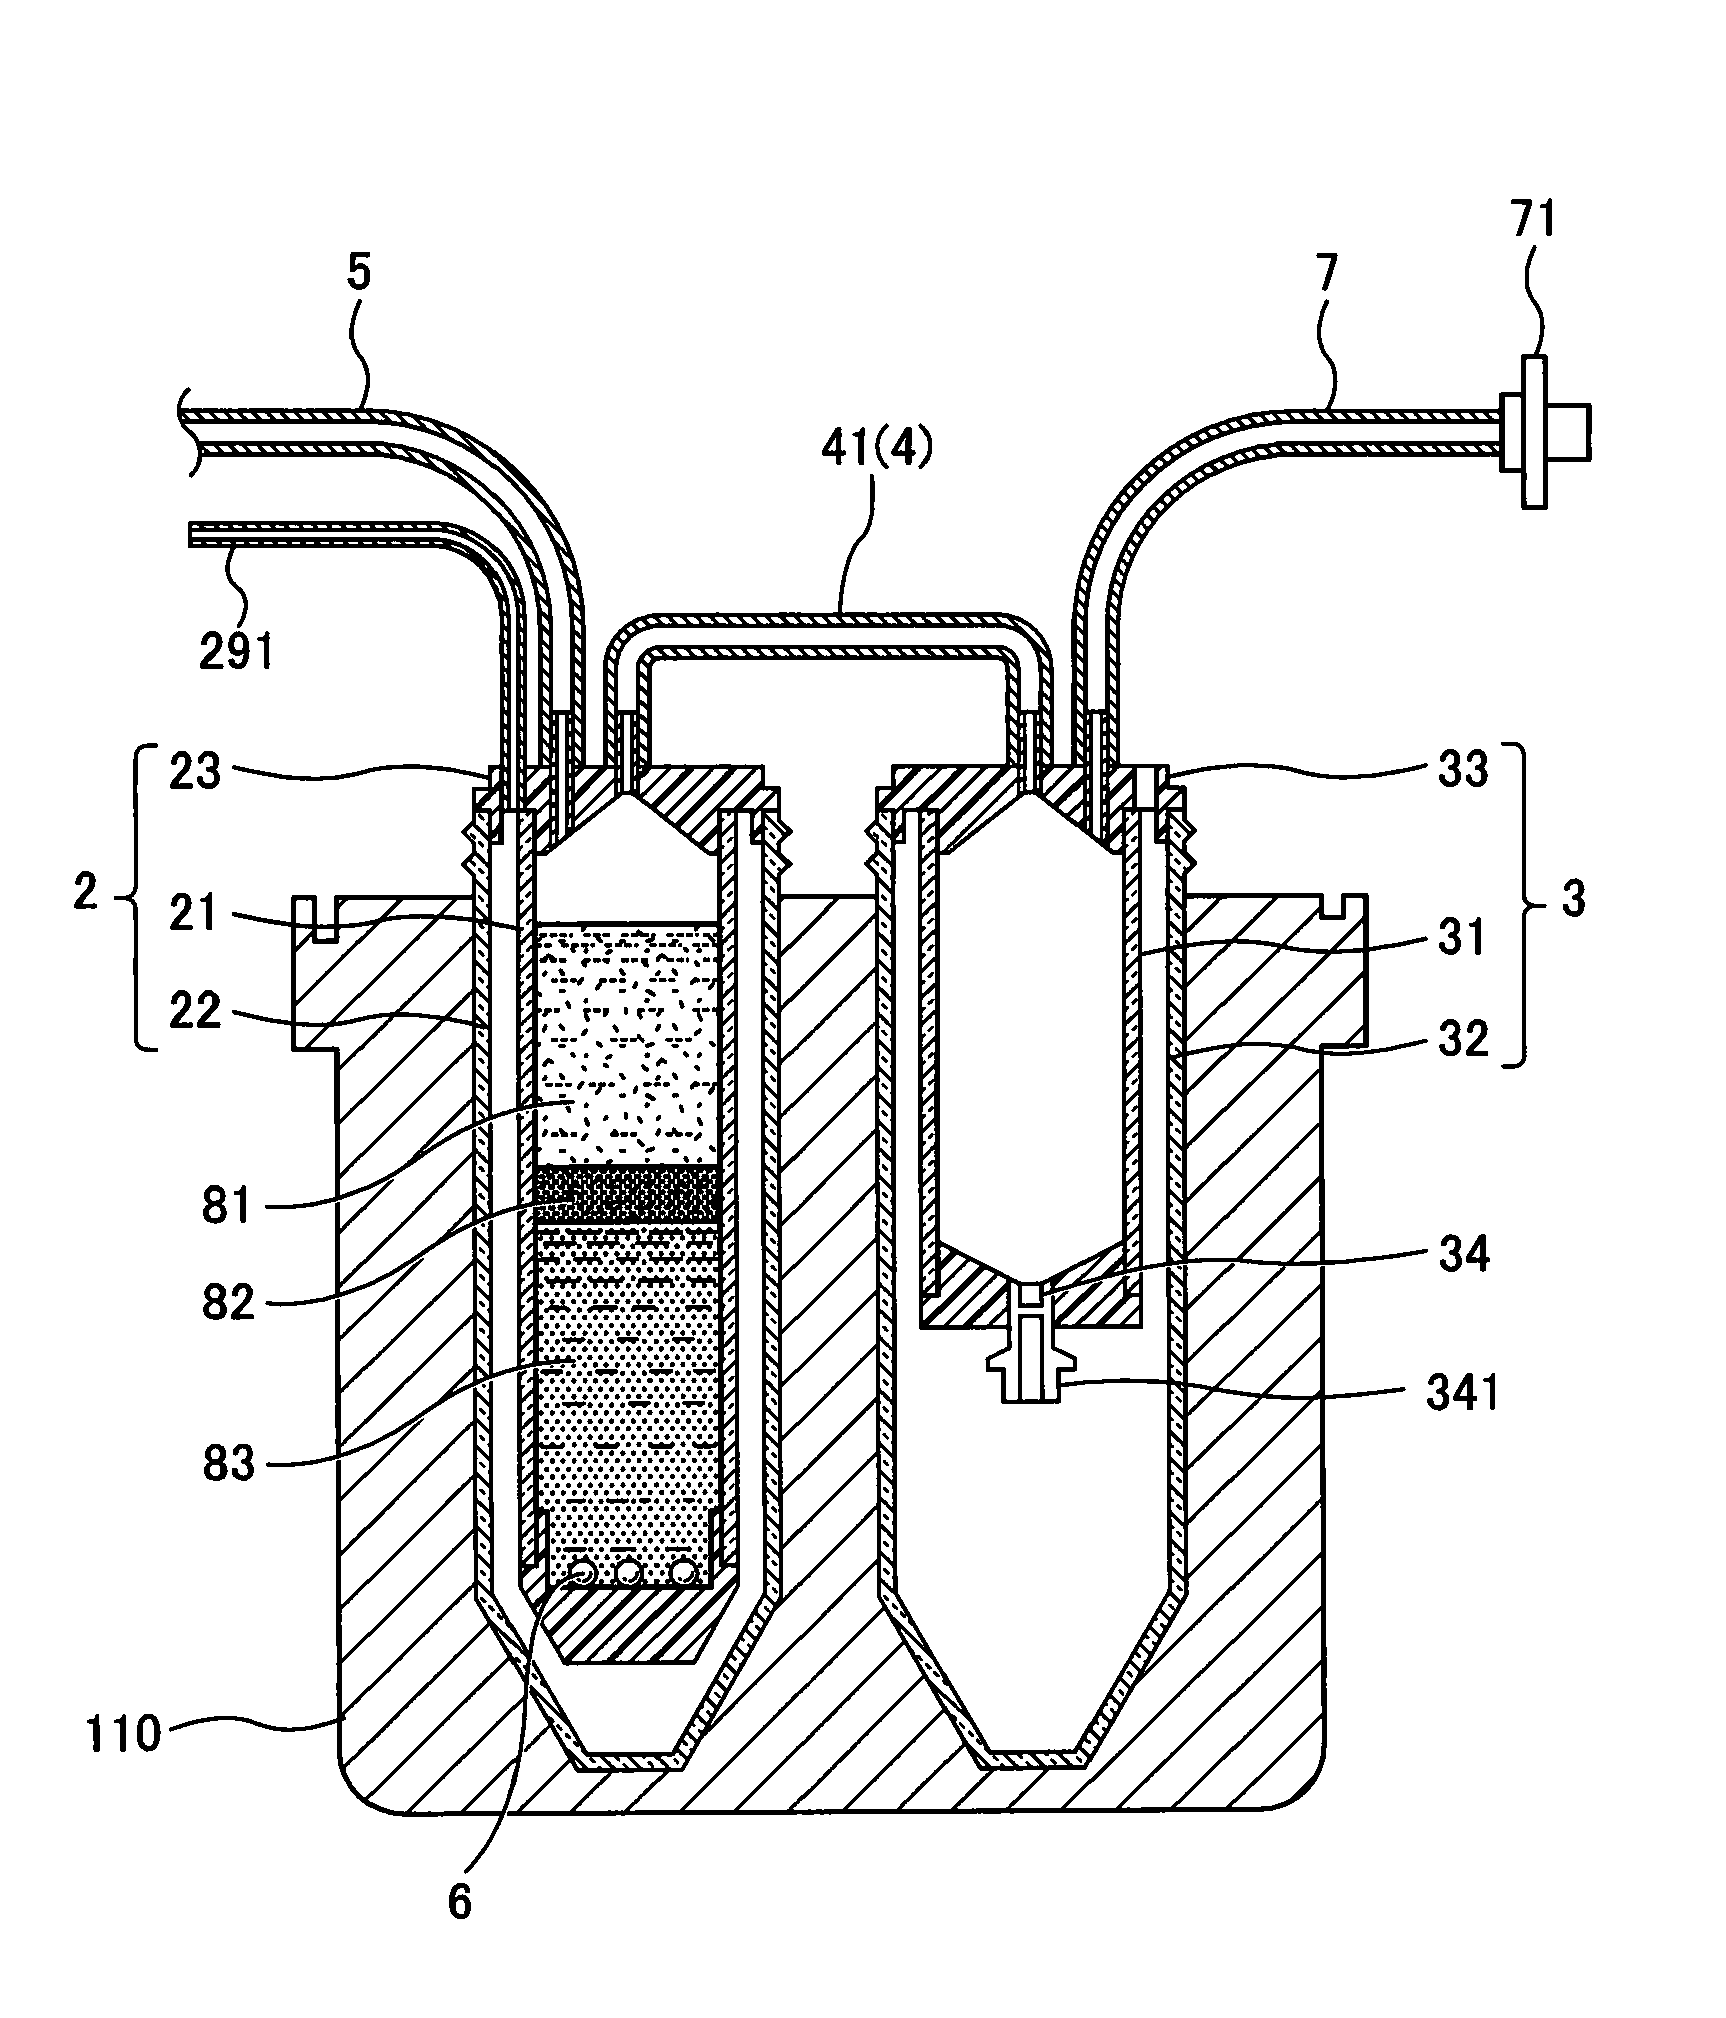 Apparatus for separating and storing blood components